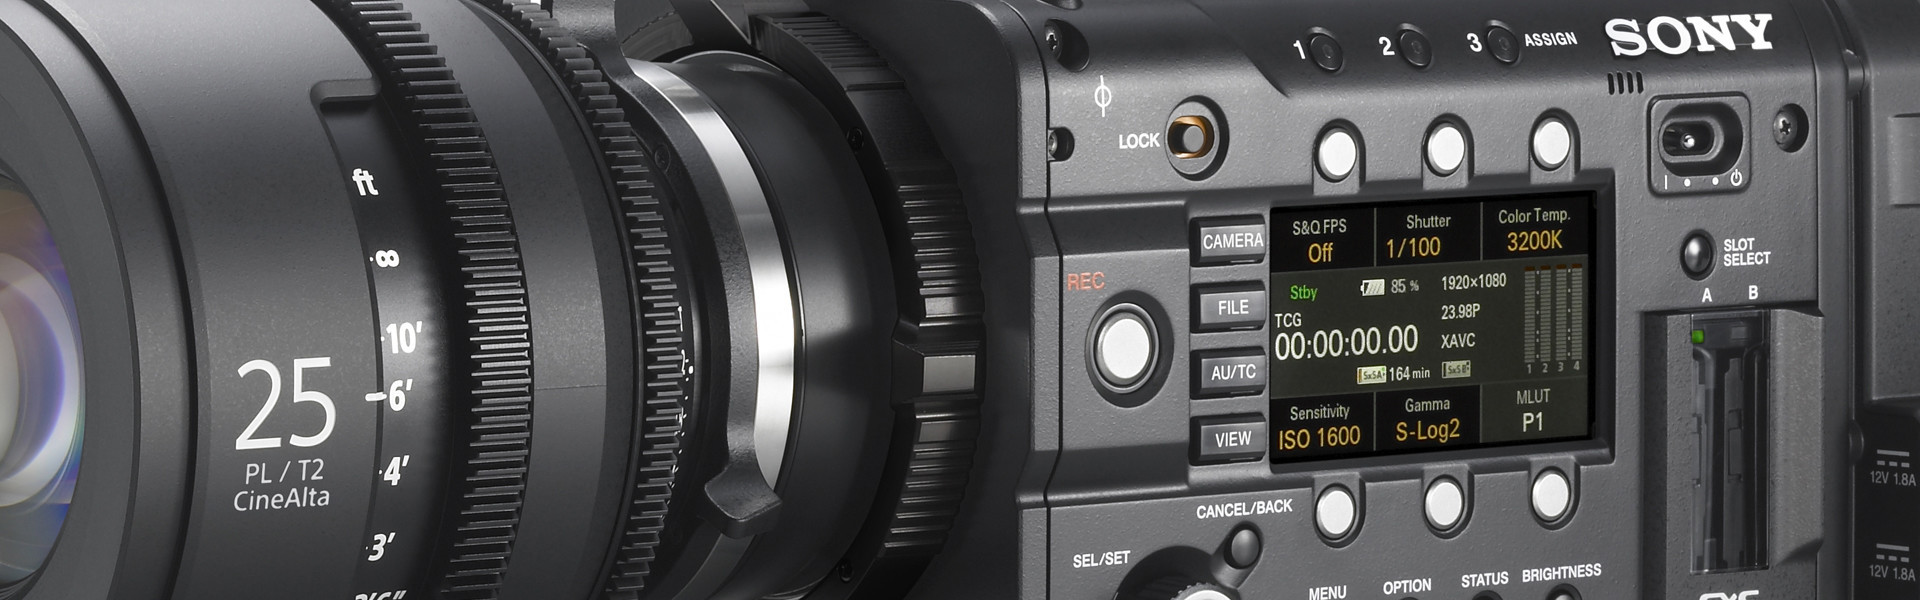 Header image for article Quick Tip: Using the OptiTek Mark II Adapter with Sony F5/F55